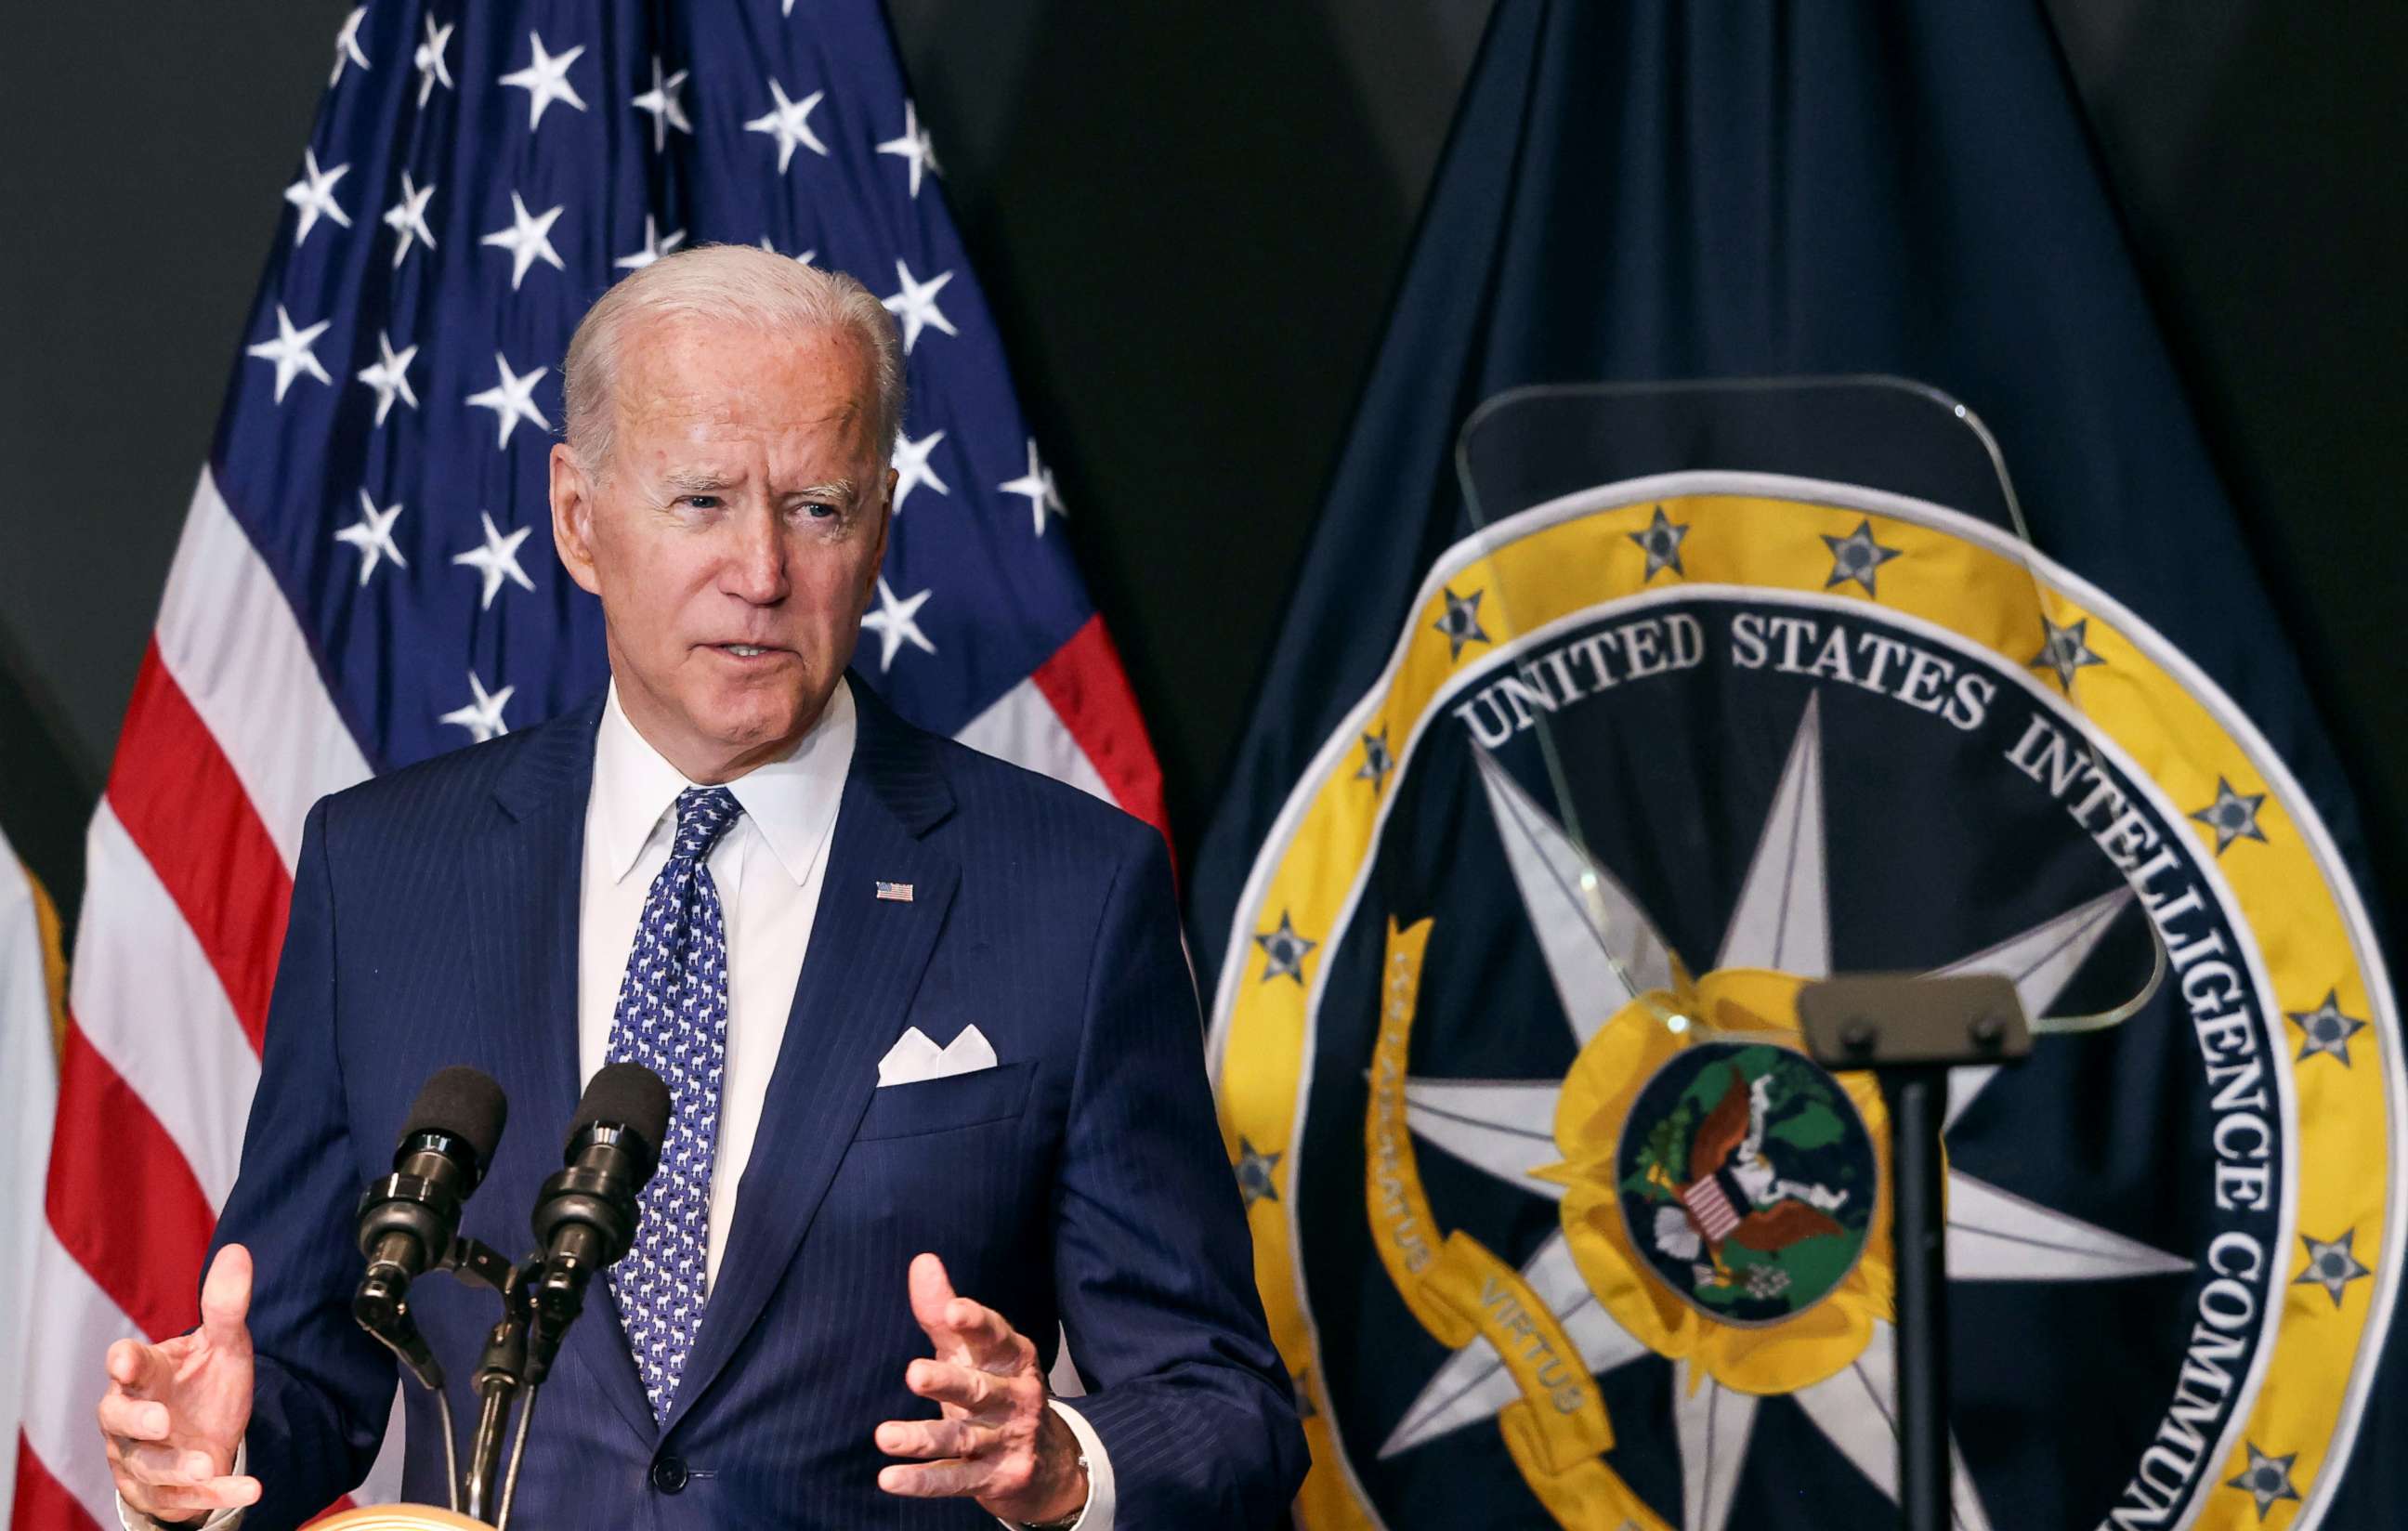 PHOTO: President Joe Biden delivers remarks to members of "the intelligence community workforce and its leadership" as he visits the Office of the Director of National Intelligence in nearby McLean, Virginia outside Washington, July 27, 2021.